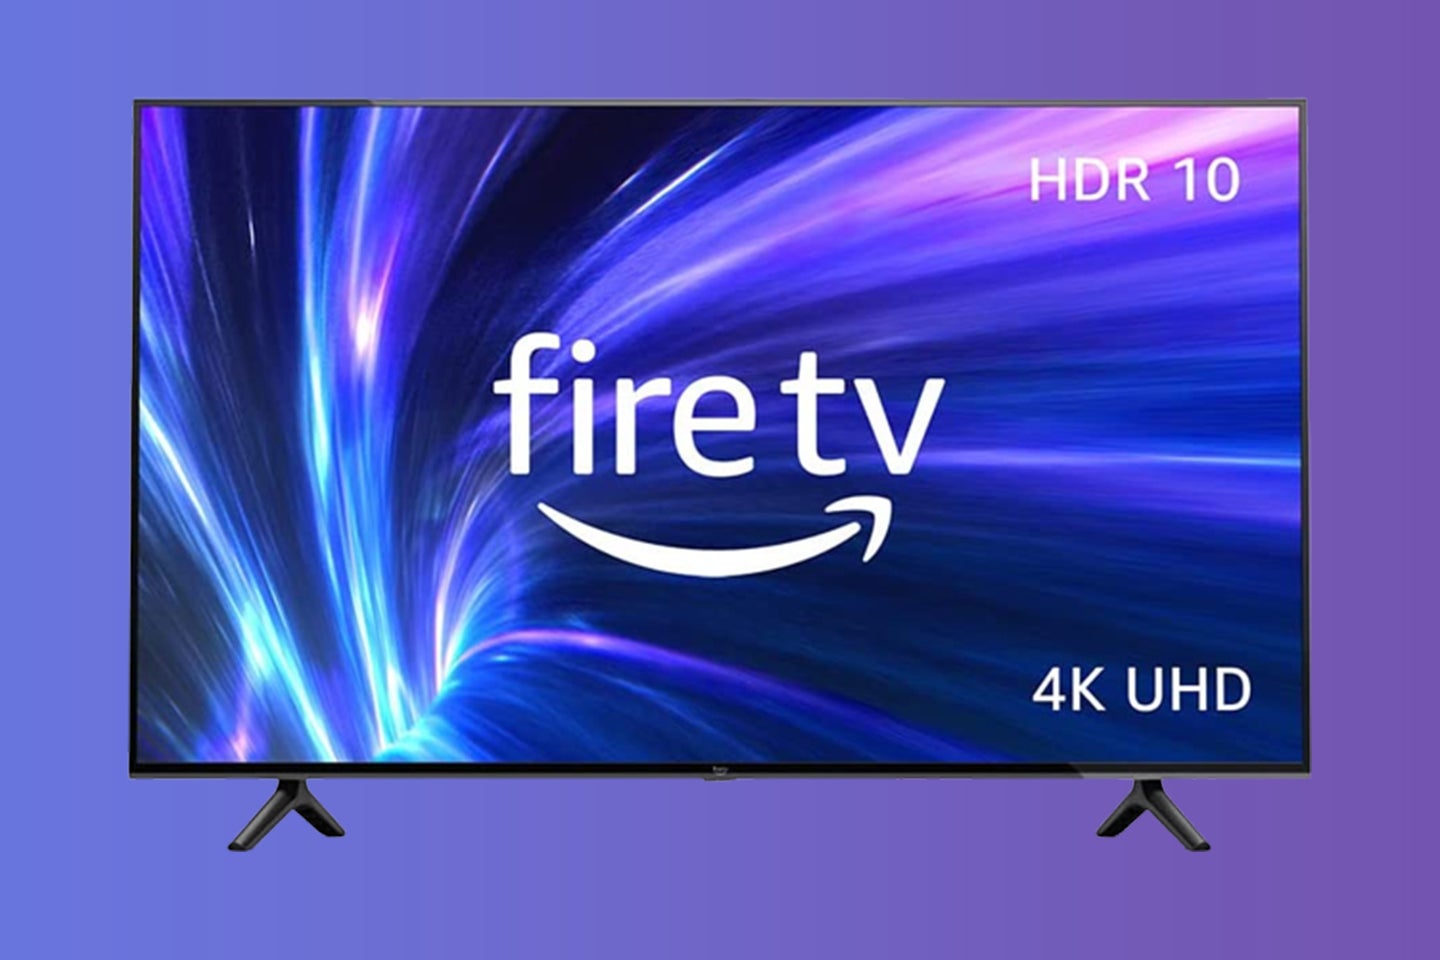 An Amazon fire TV on a blue and purple background